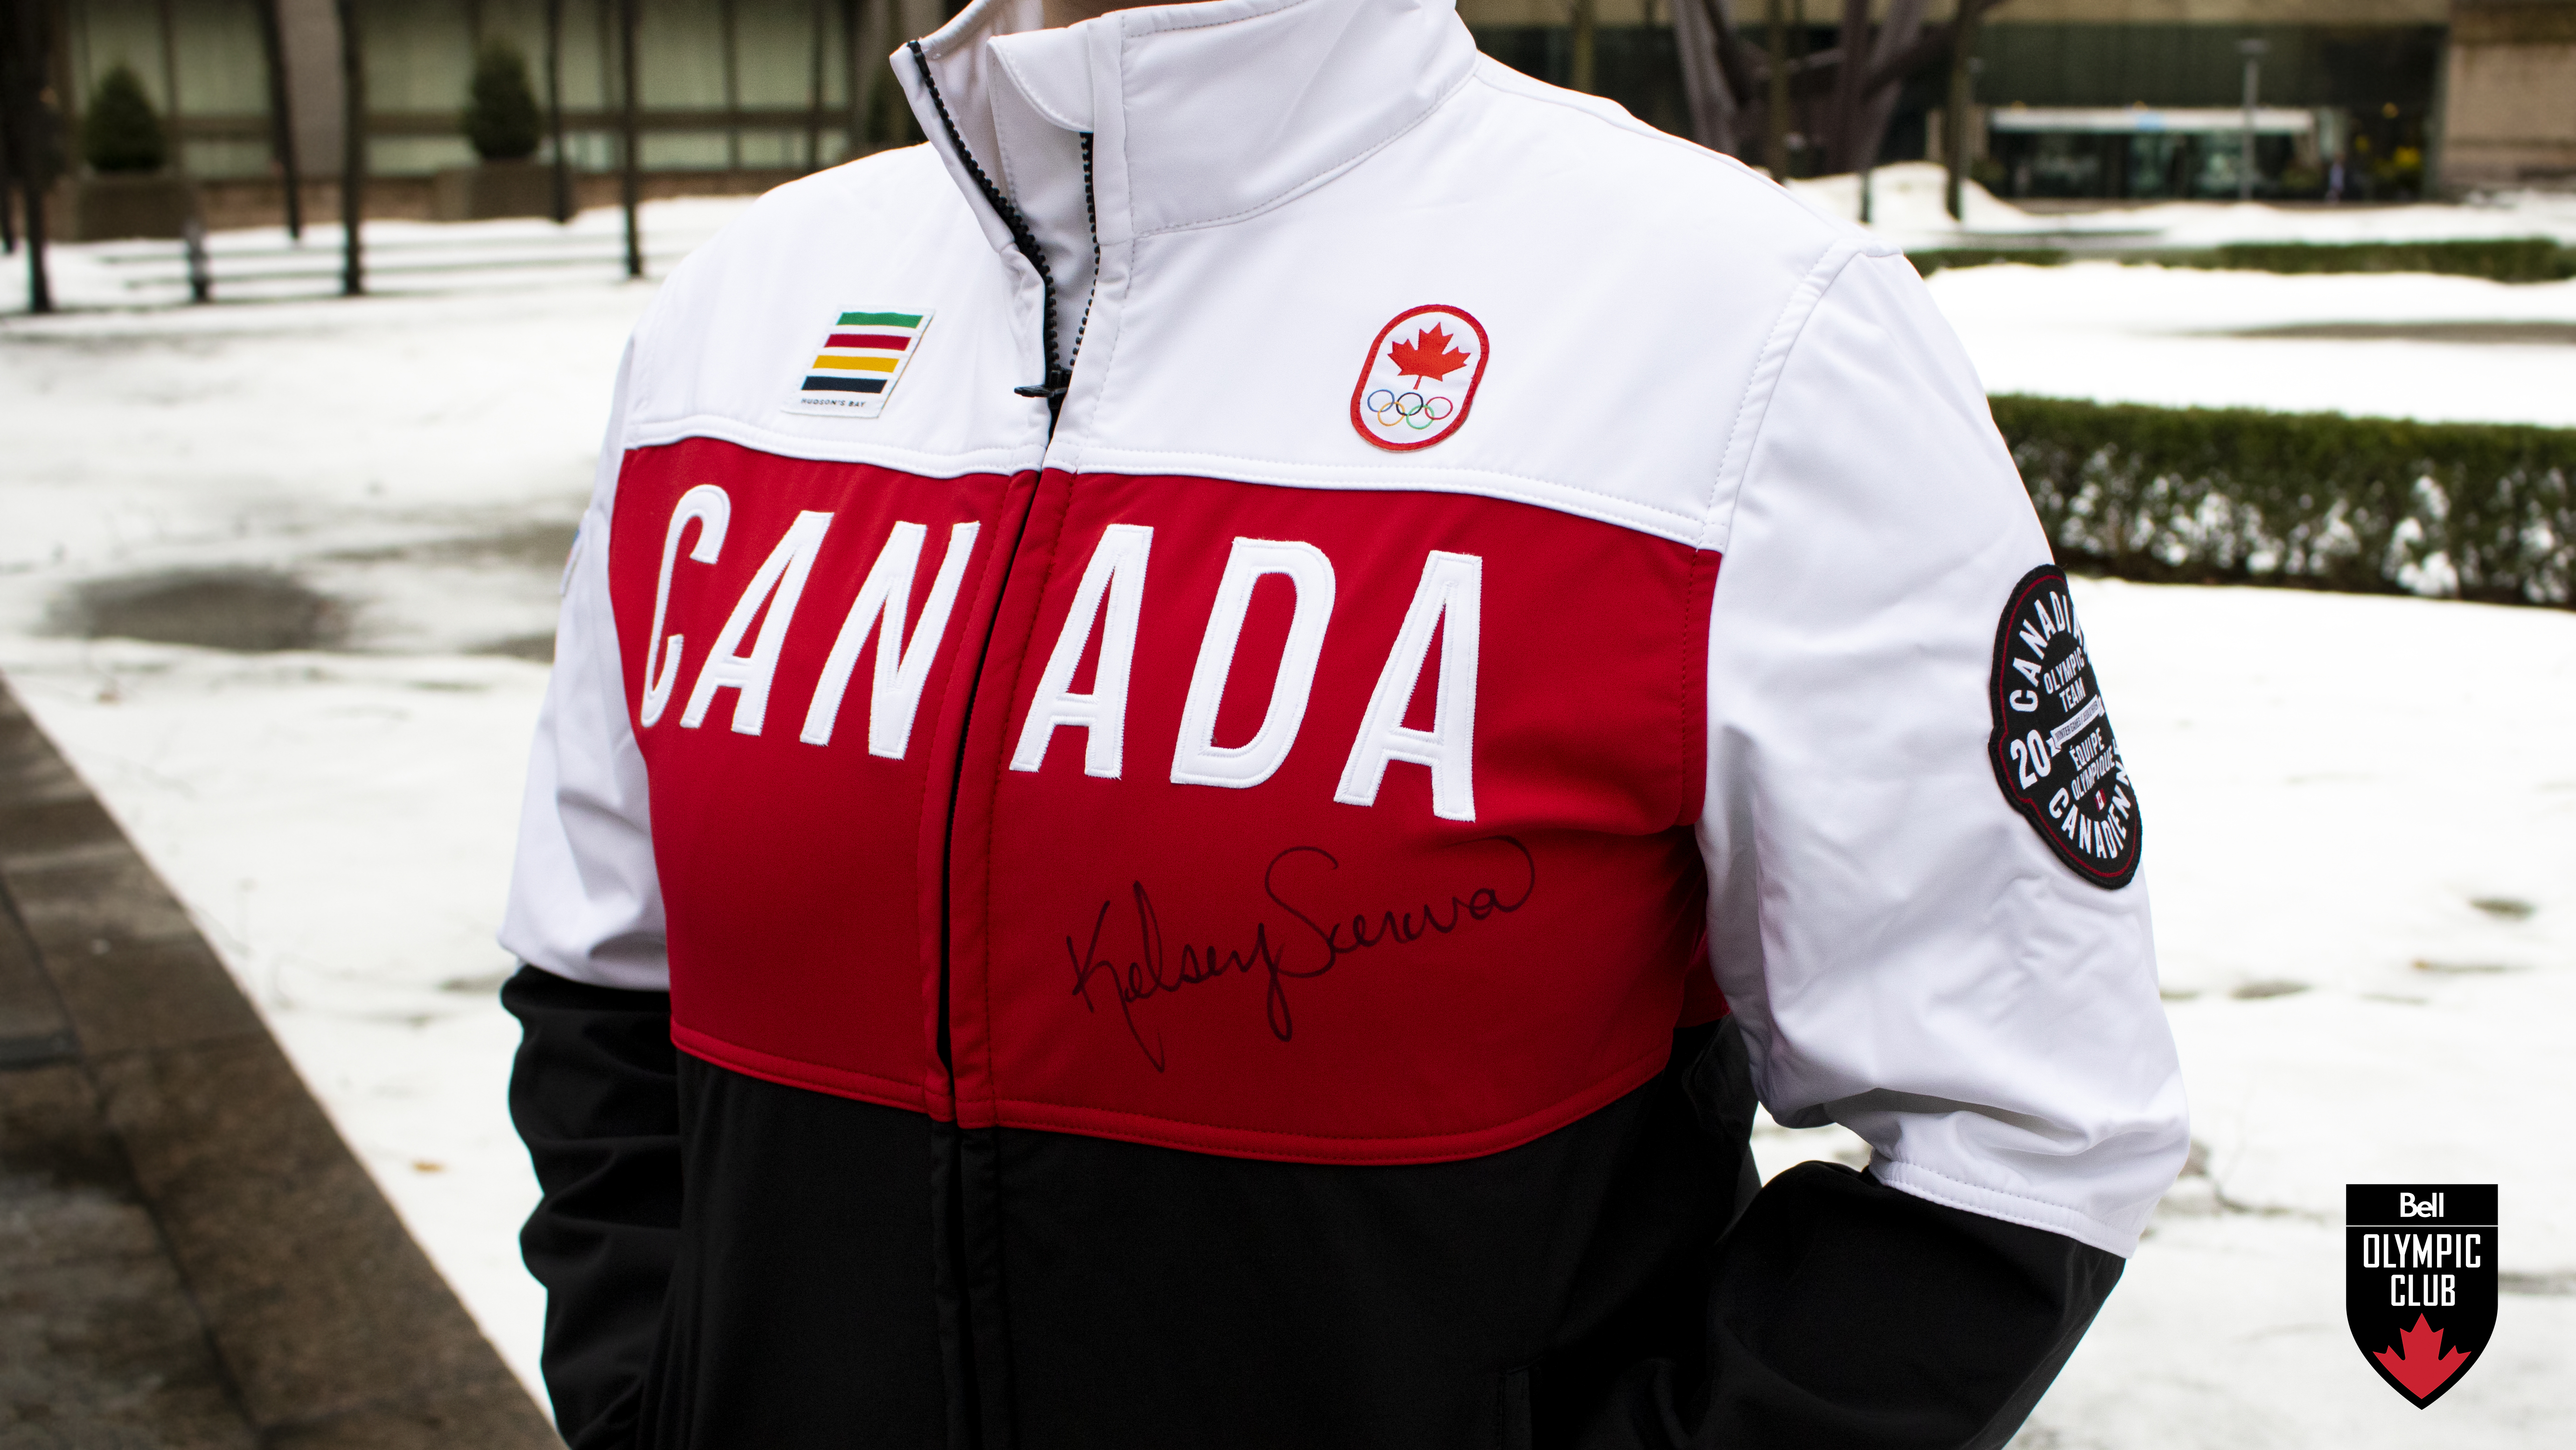 online contests, sweepstakes and giveaways - Win a Team Canada podium jacket signed by Olympic champion Kelsey Serwa